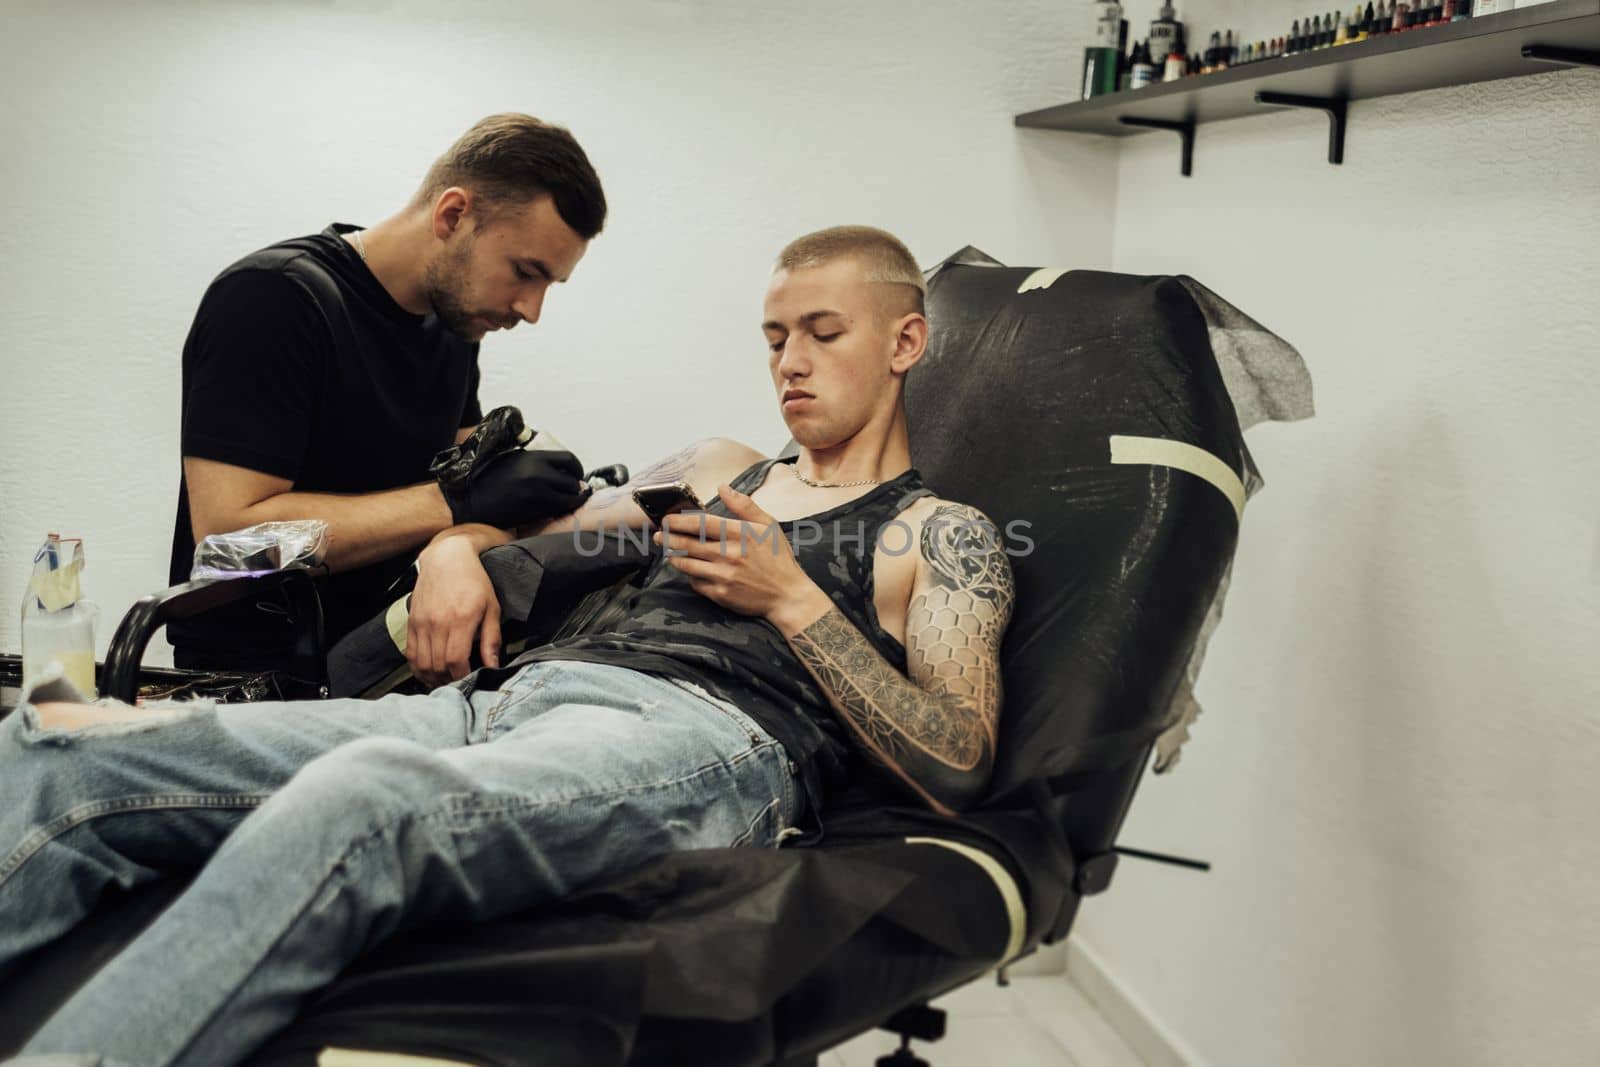 Tattooed Man on the Process of Creating New Tattoo at Studio, Male Artist Draws on Clients Skin